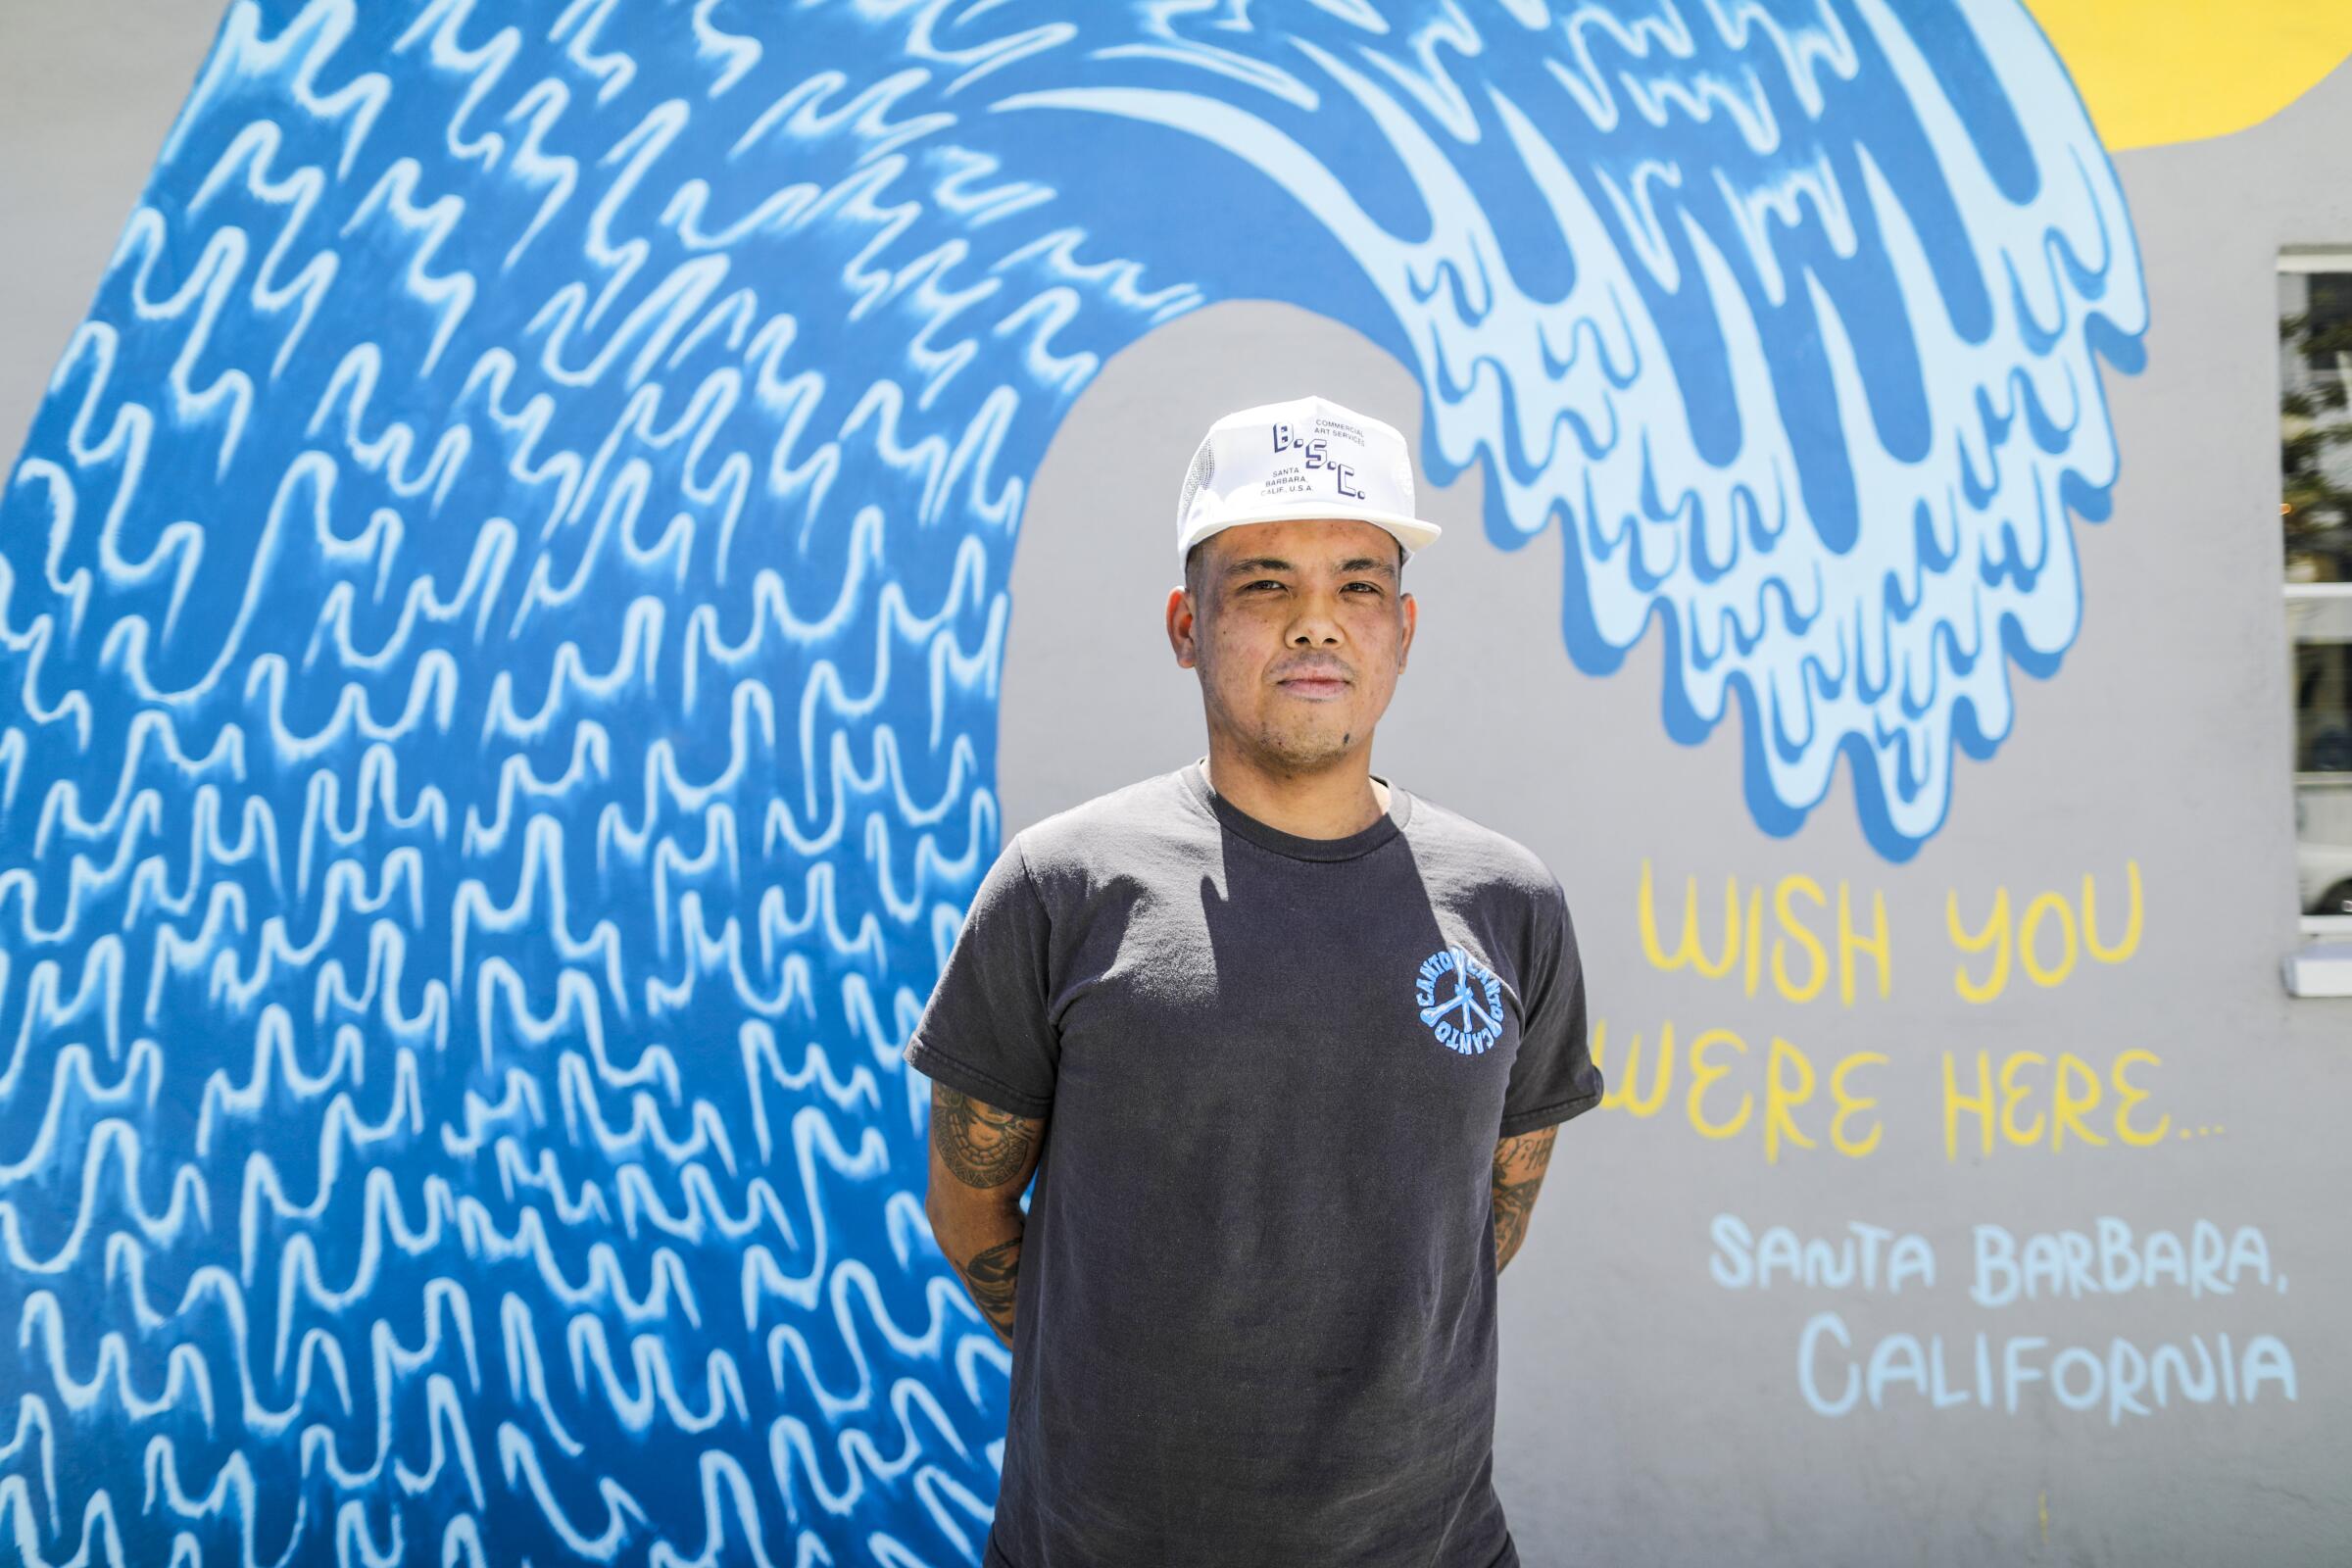 A young man in a T-shirt and baseball cap in front of a mural of a wave and the words "Wish you were here."